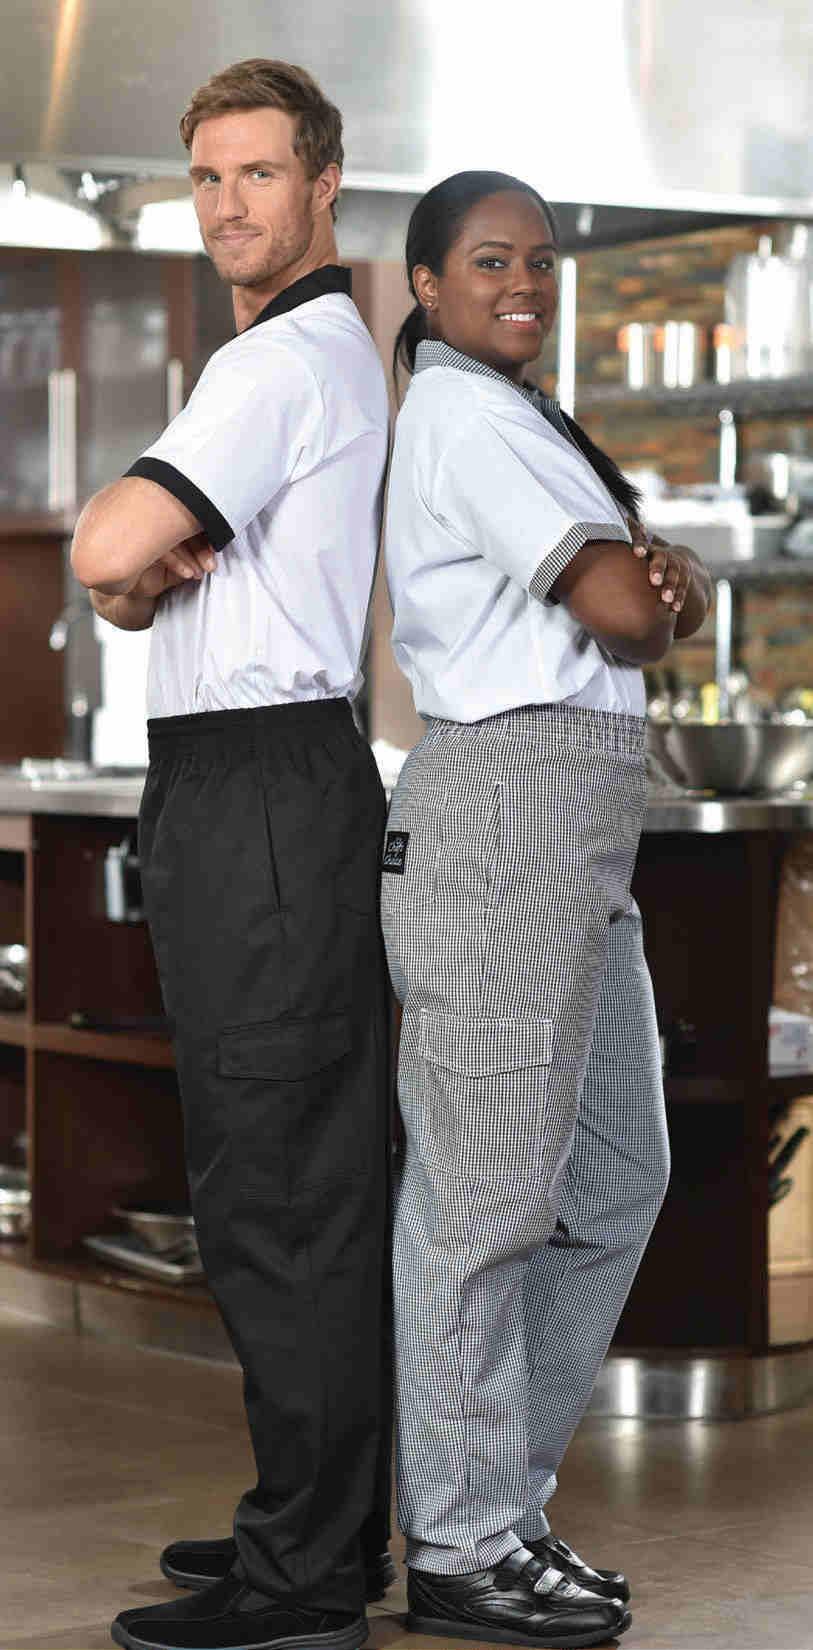 BAGGY CHEF PANTS Cargo Chef Pants The extra pockets of the